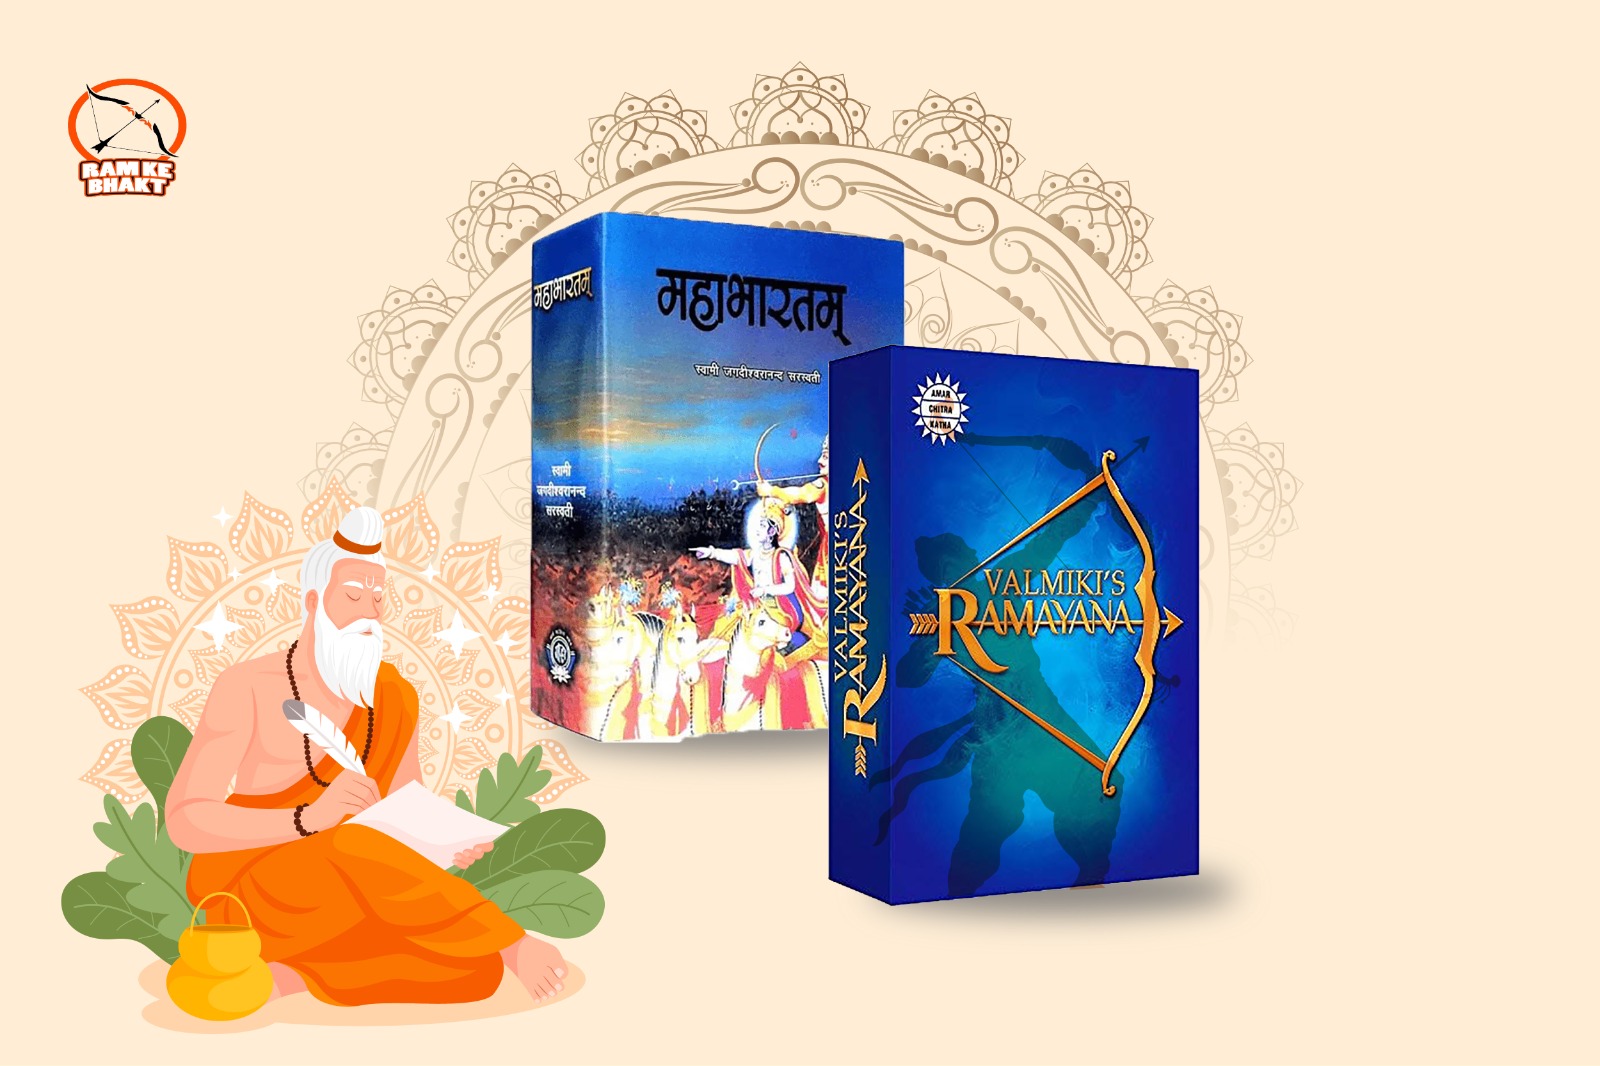 Two Epic Books Of The Hindu Religion” Ramayana And Mahabharata” And Their Lessons